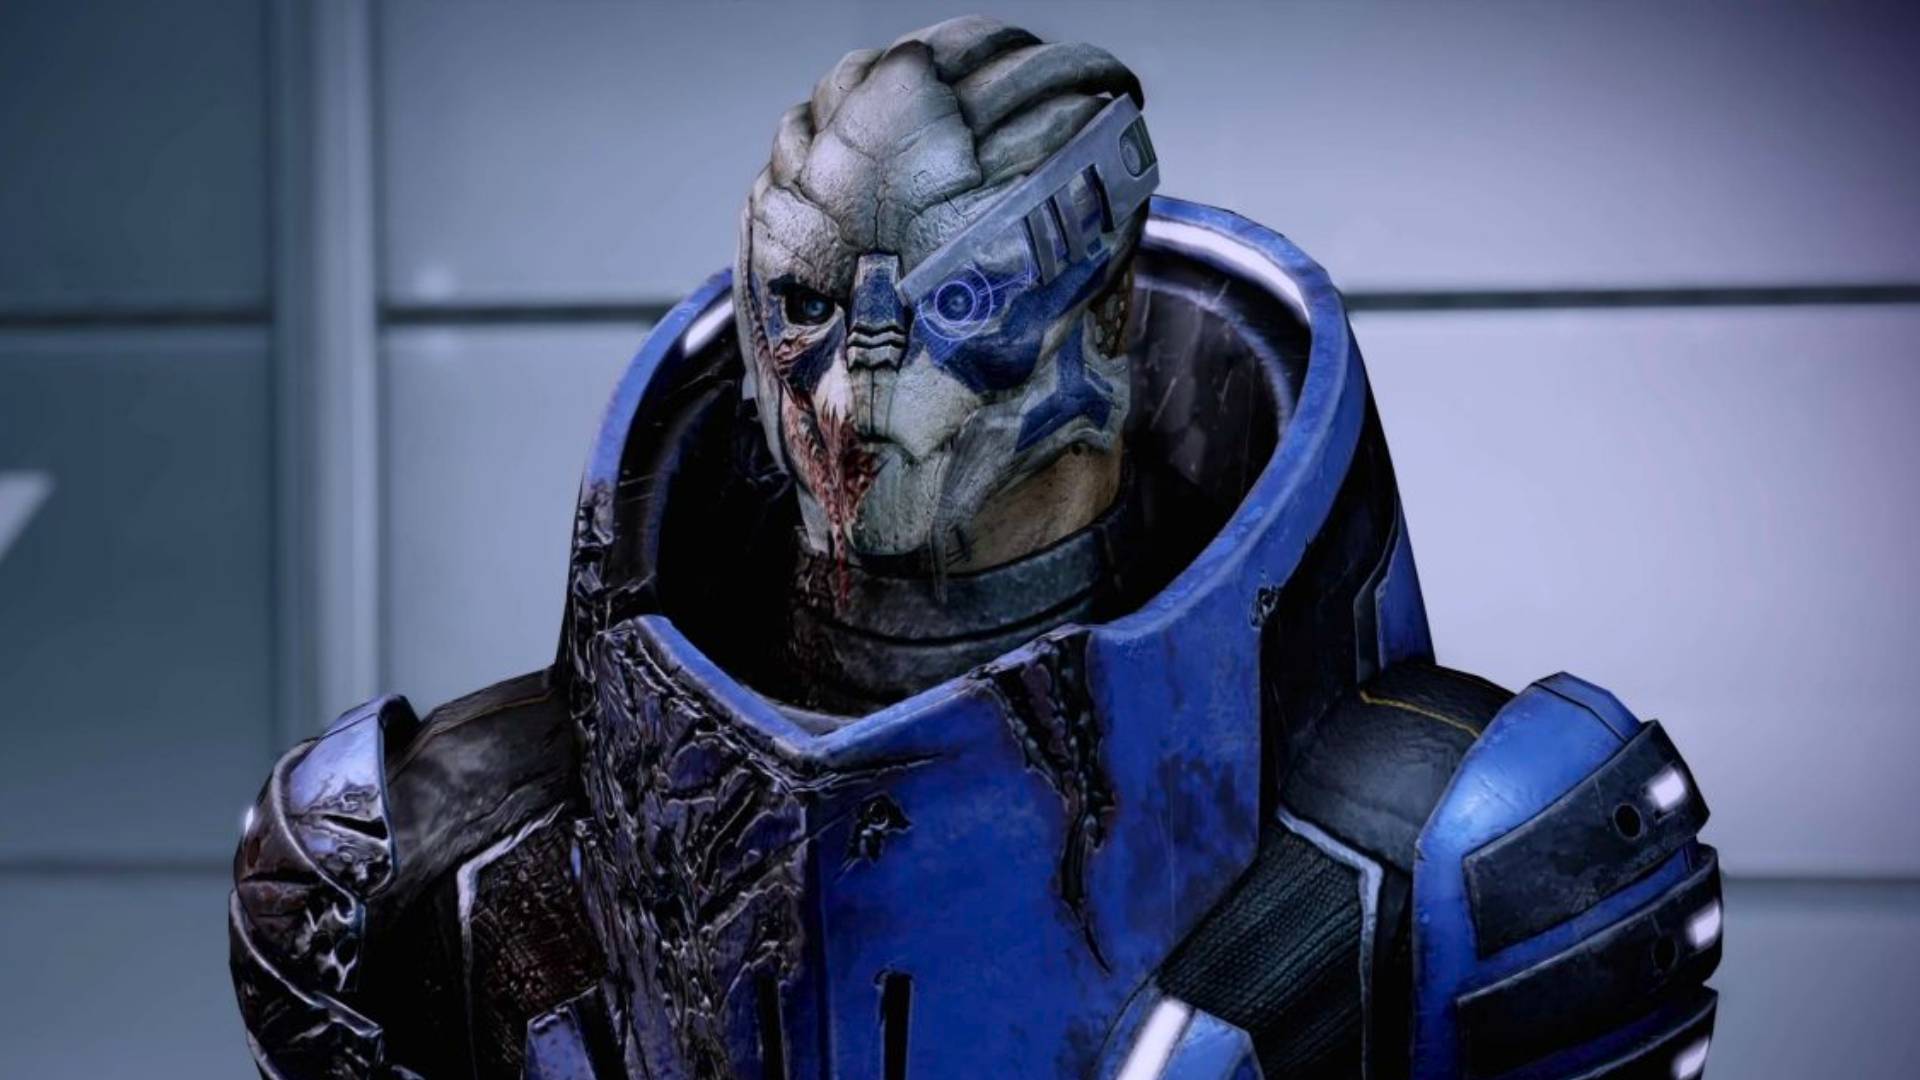 Mass Effect may go back to 